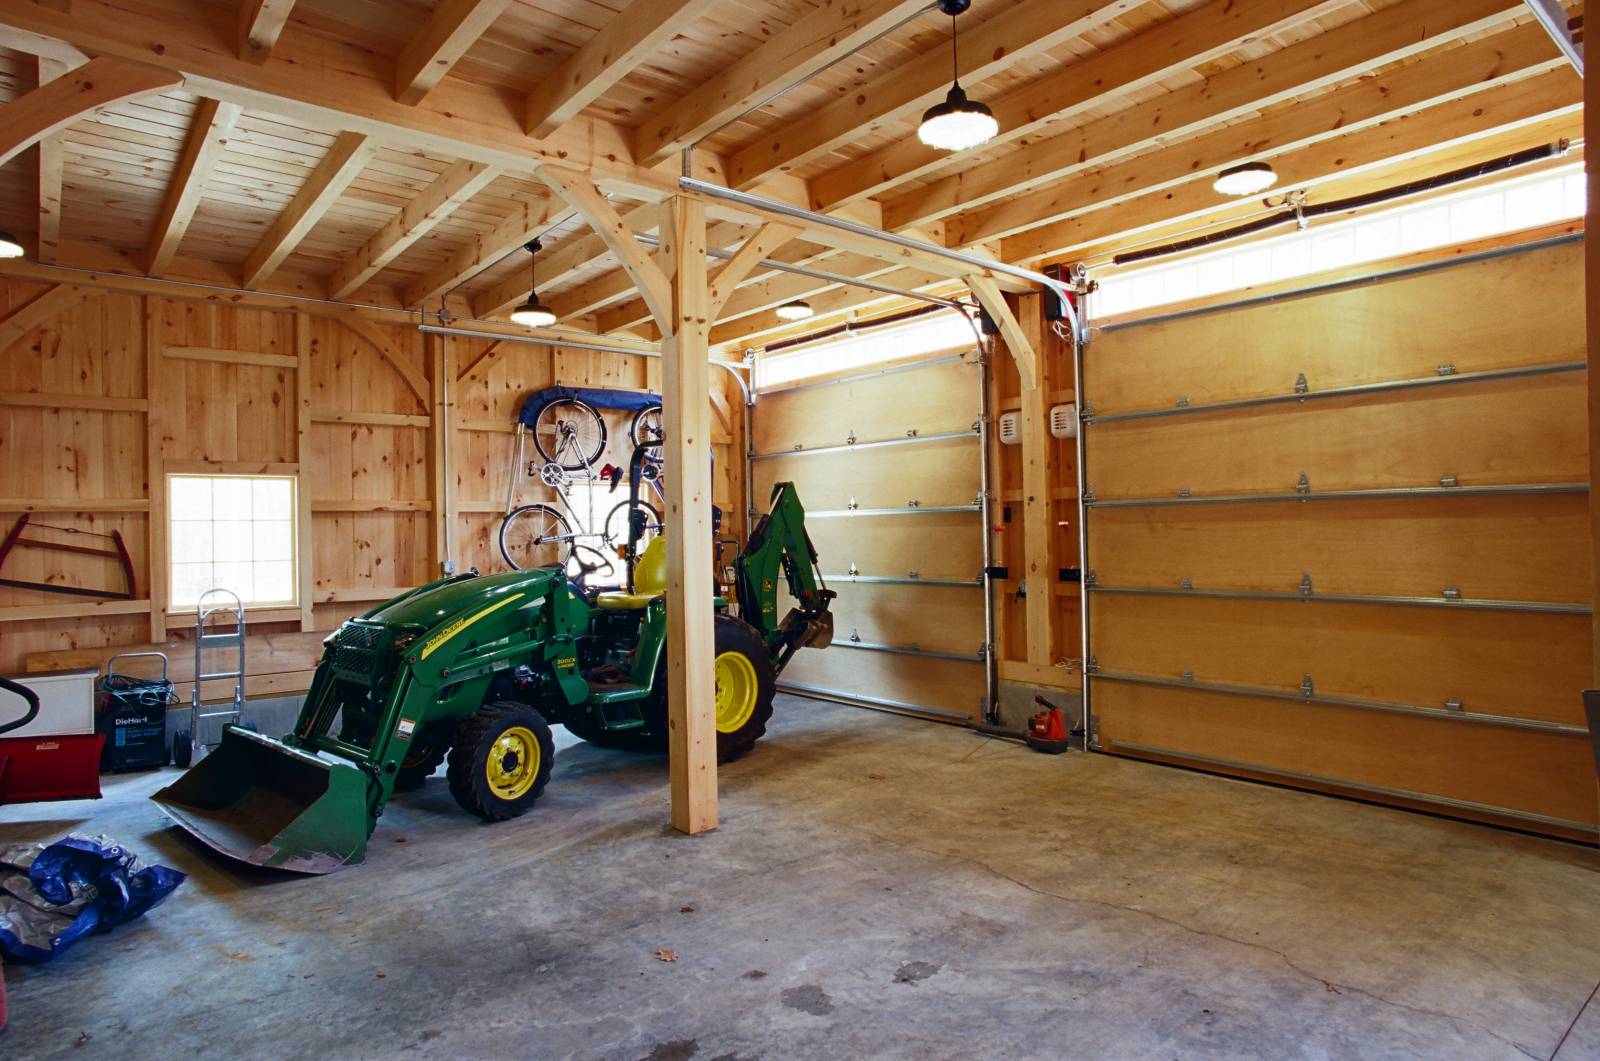 Tractor on the first floor of the Carriage Barn. 12' first floor ceiling height.